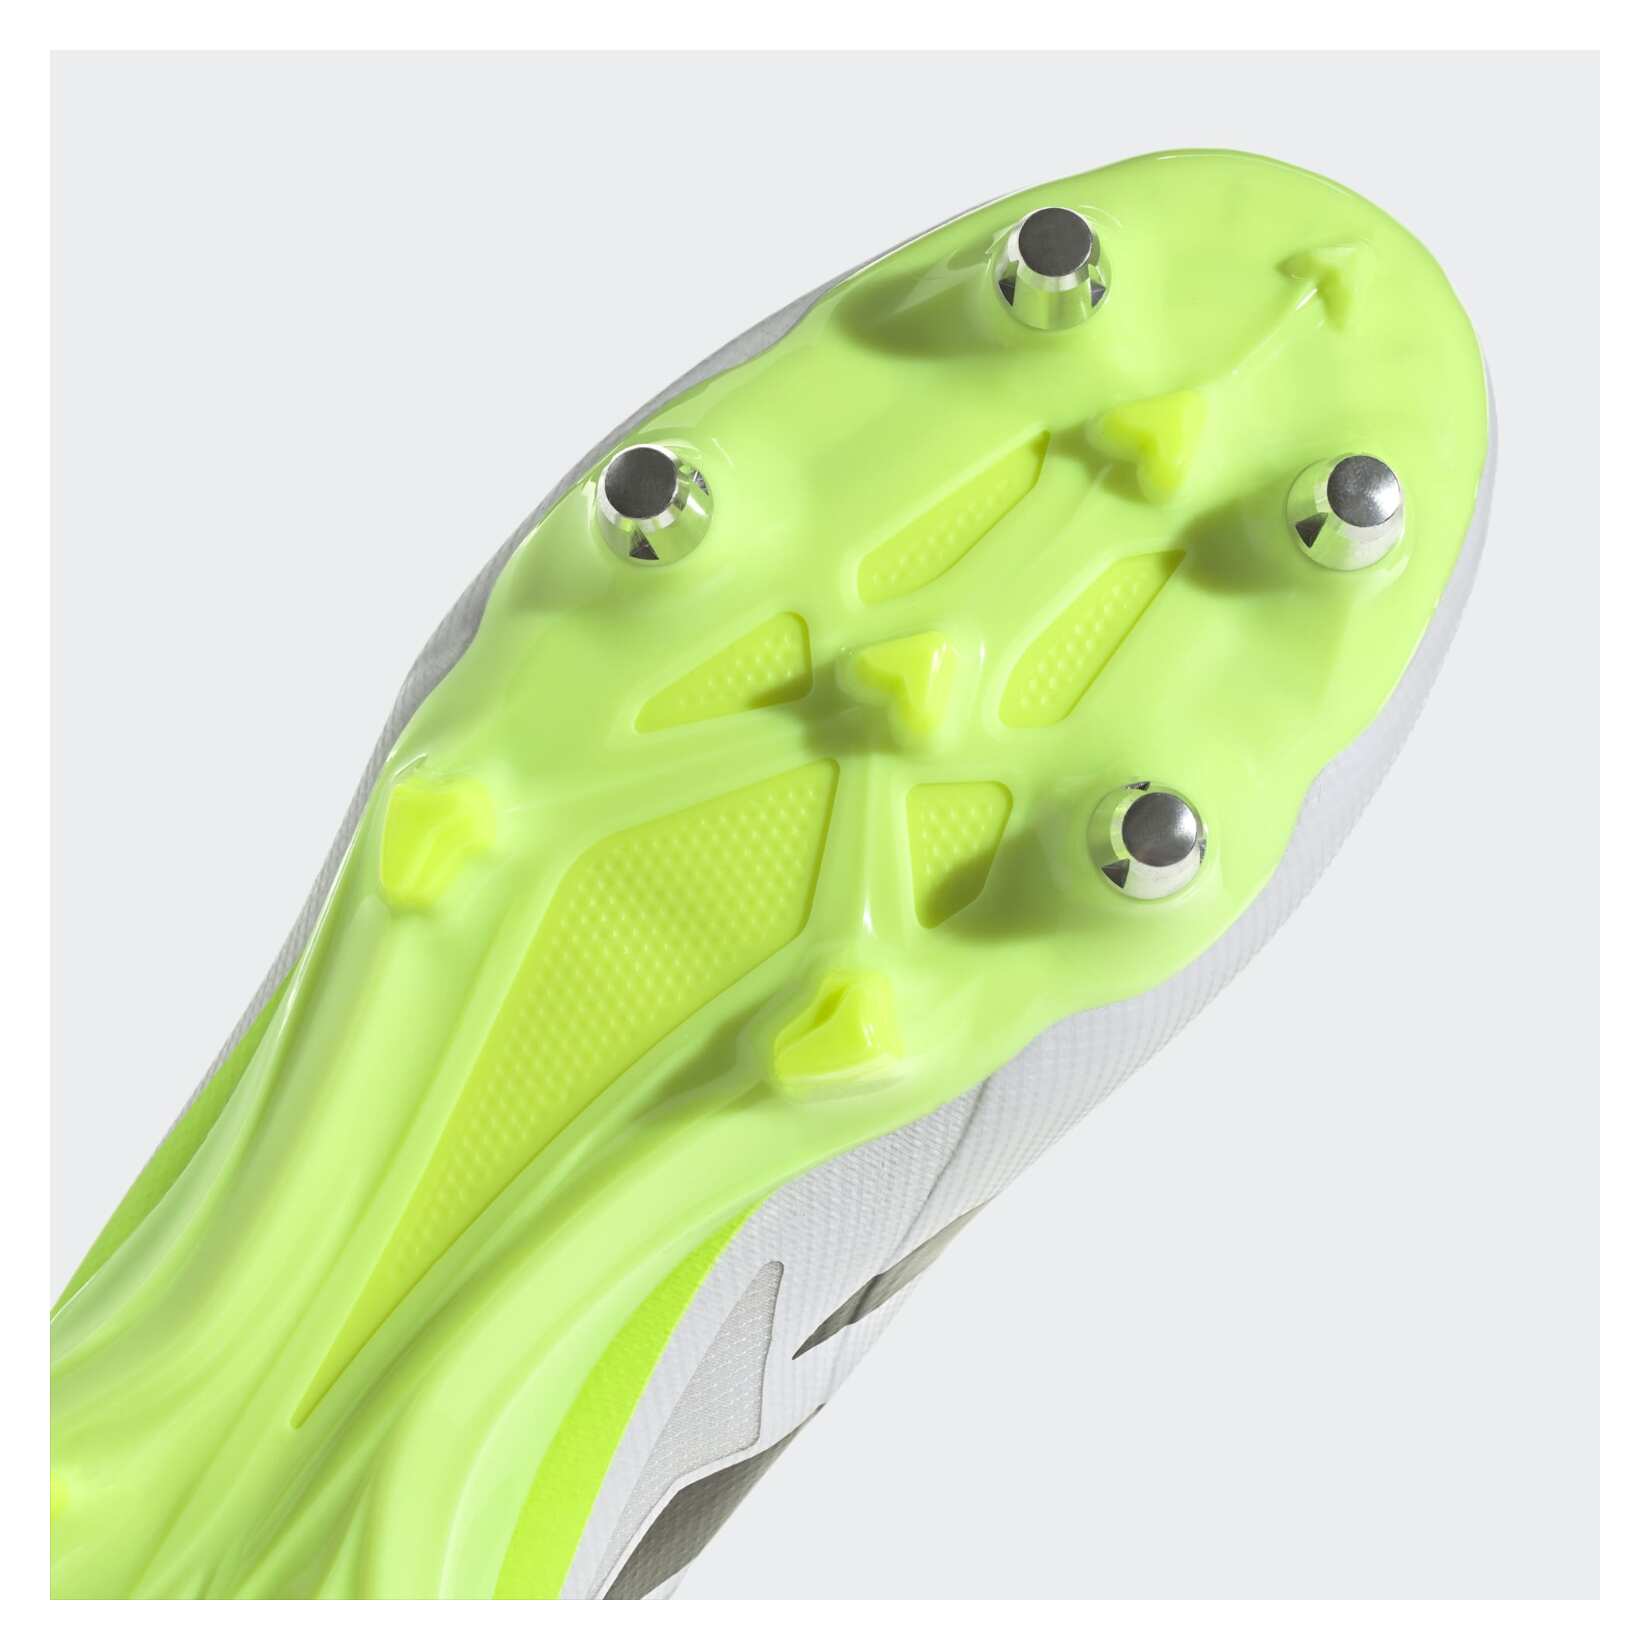 Rugby Cleats, Soft and Firm Ground Cleats